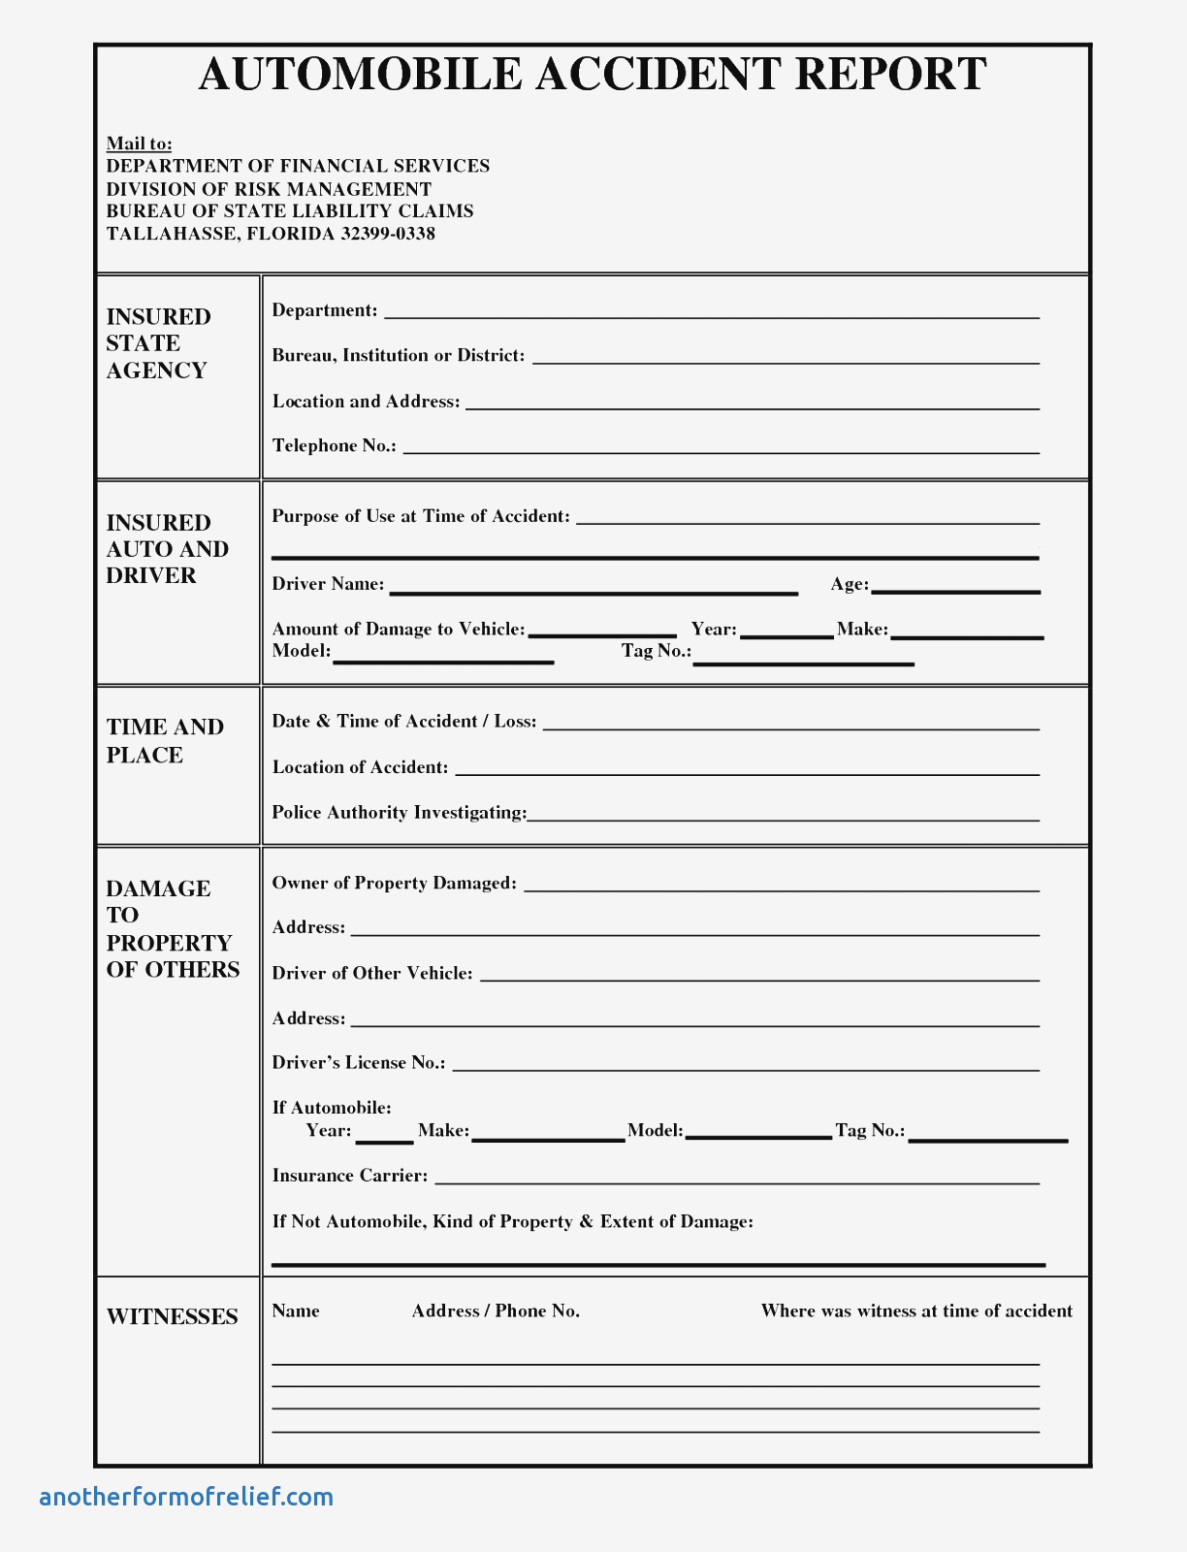 Auto Accident Report Form Income Tax Keep In Your Glove Box Intended For Motor Vehicle Accident Report Form Template